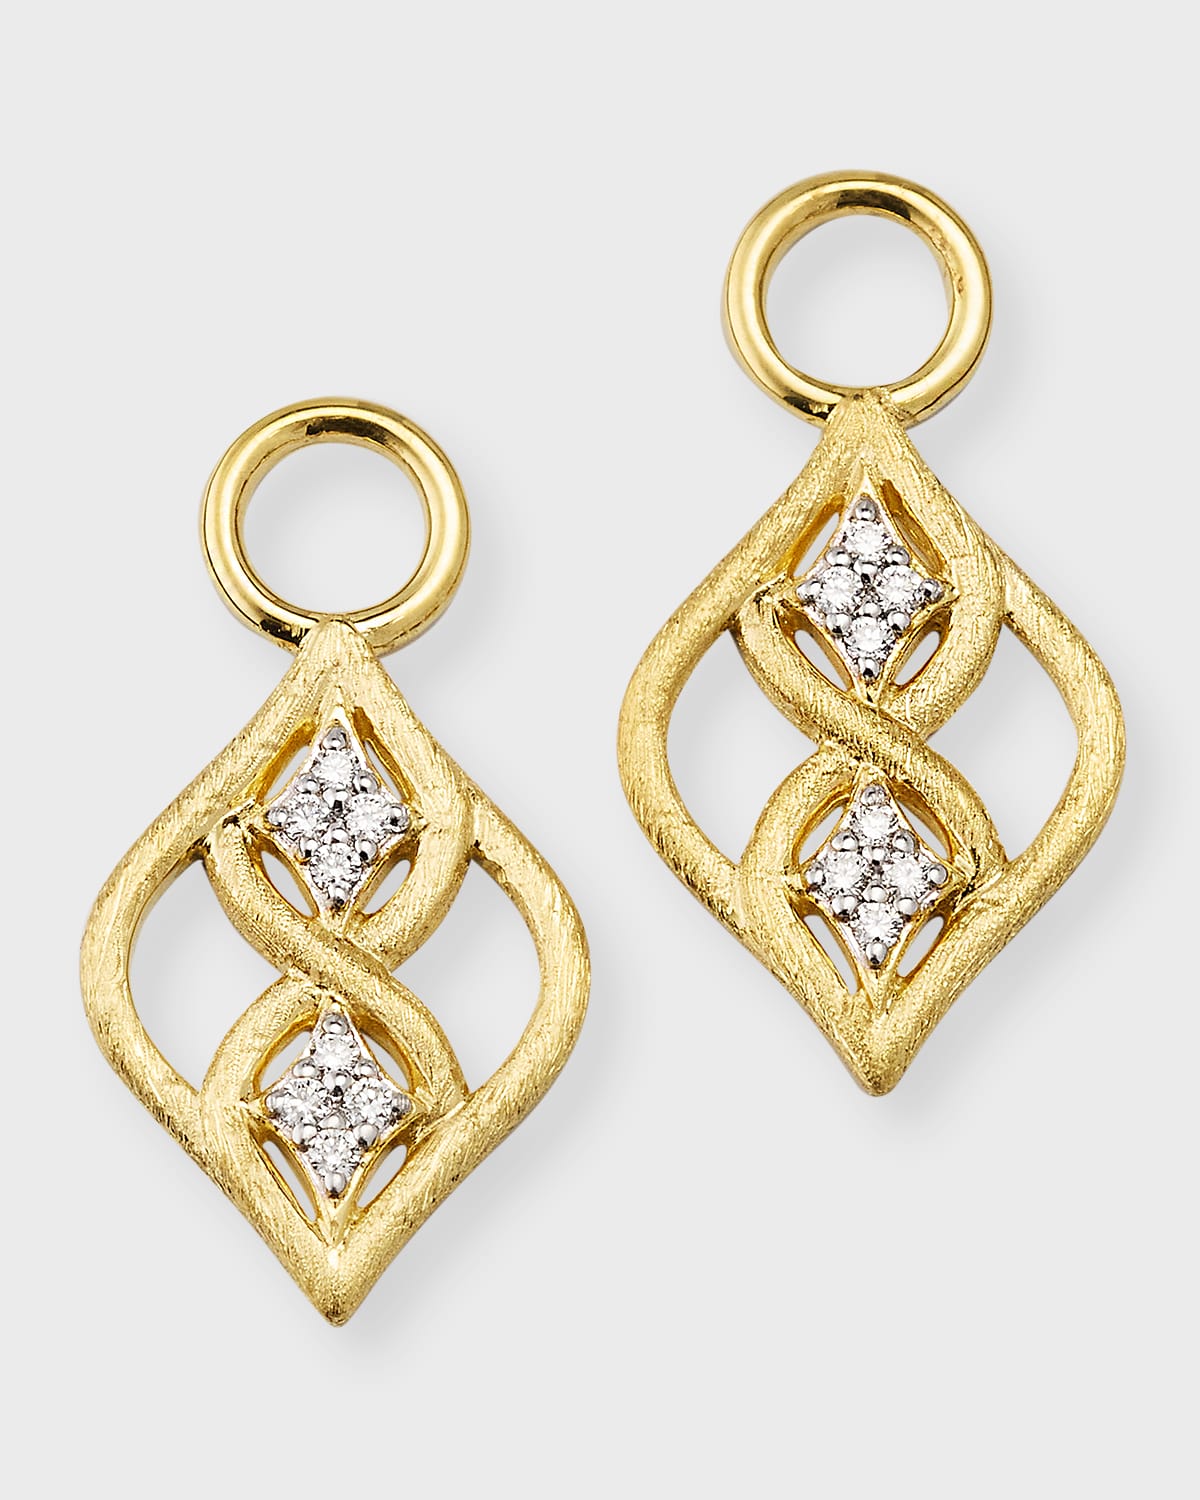 Earring Charms with Ornate Design